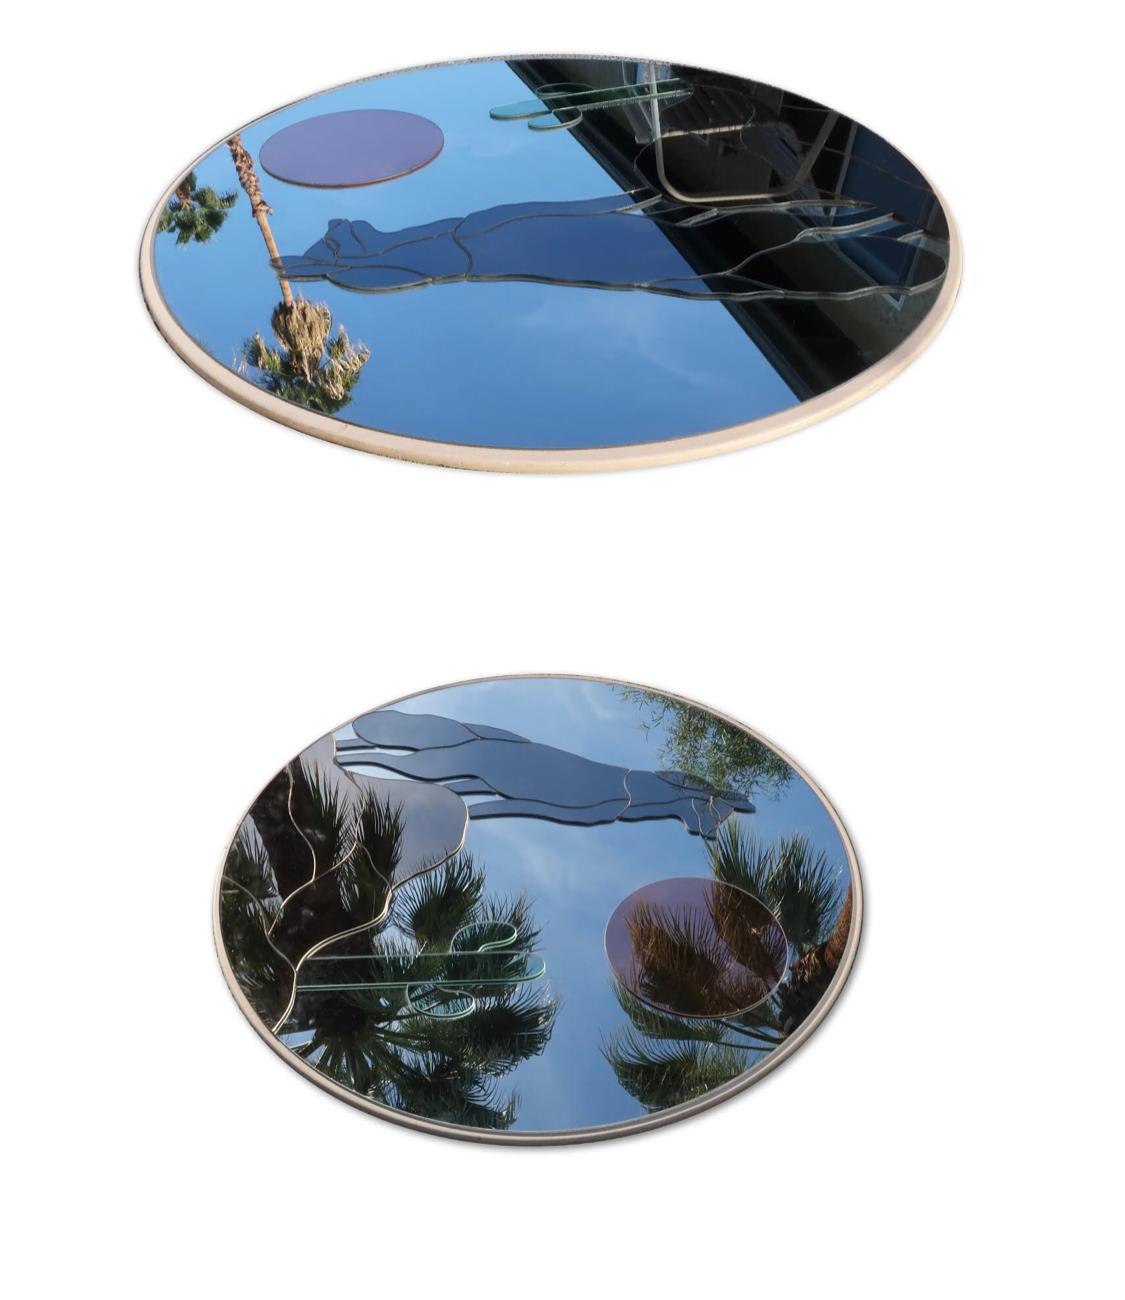 It is hard to describe just how stunning this mirror is. Mounted on a white painted wood board, this is three and a half feet wide with colored pieces of mirror applied to a large round mirror to create an image of a coyote or wolf standing on a